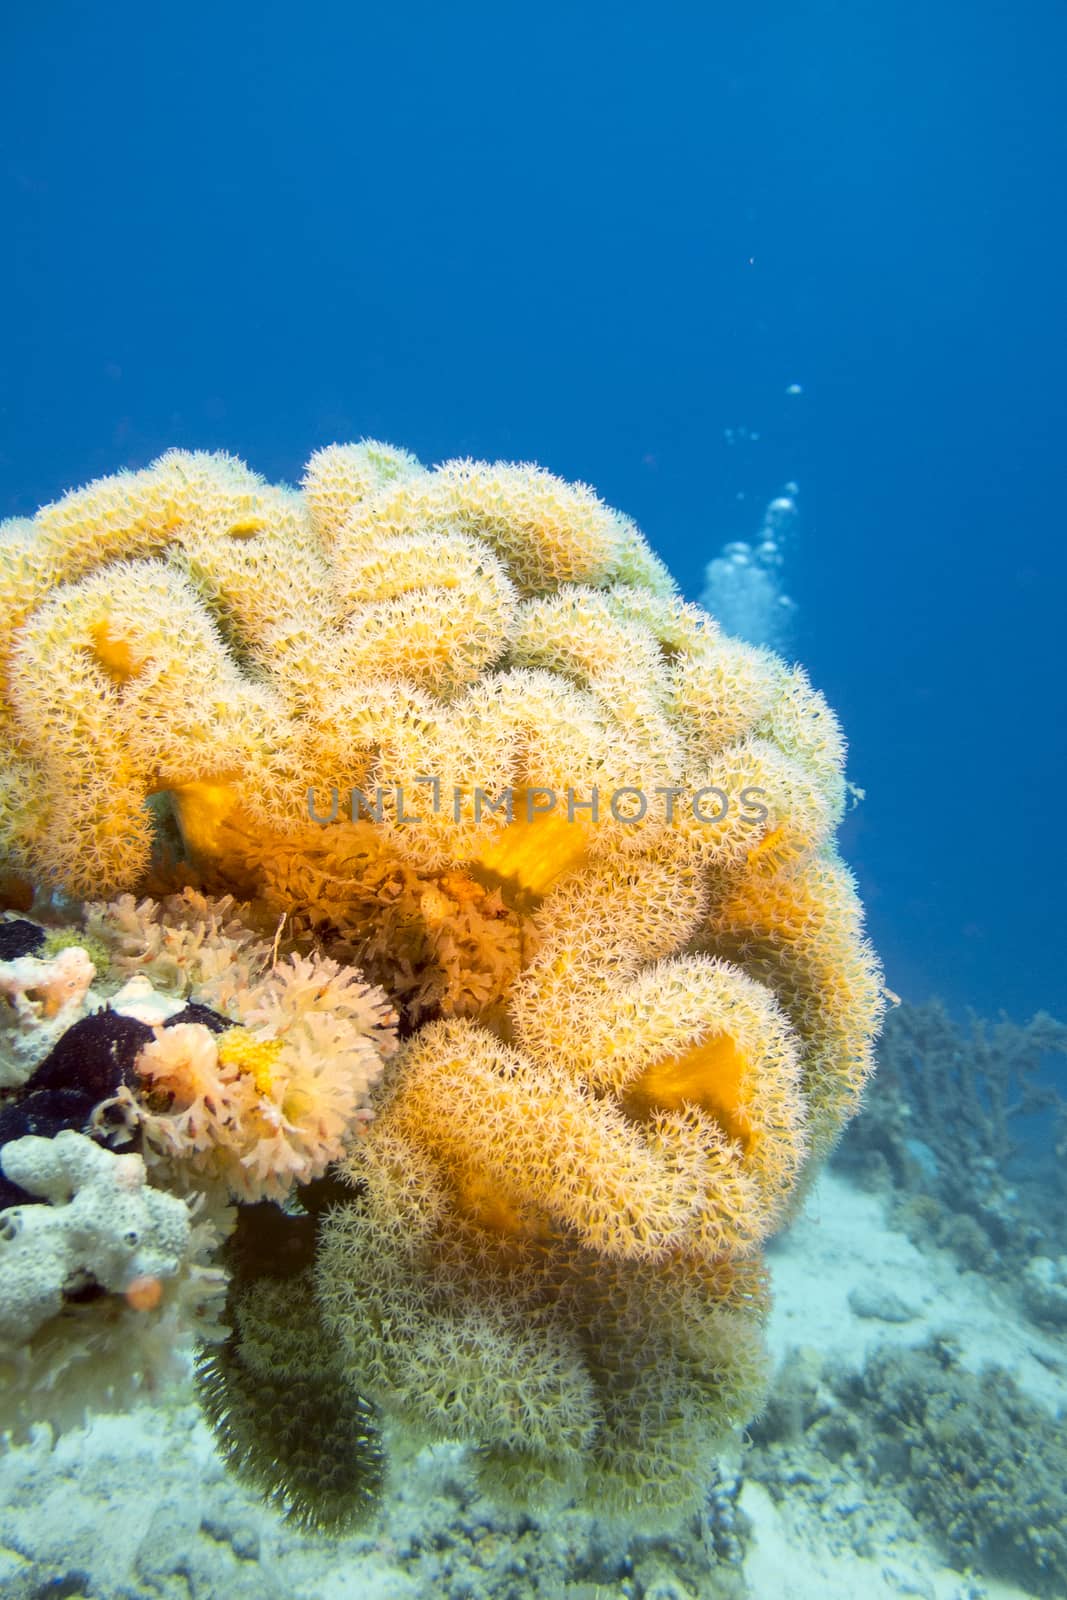 coral reaf with yellow mushroom leather coral in tropical sea by mychadre77